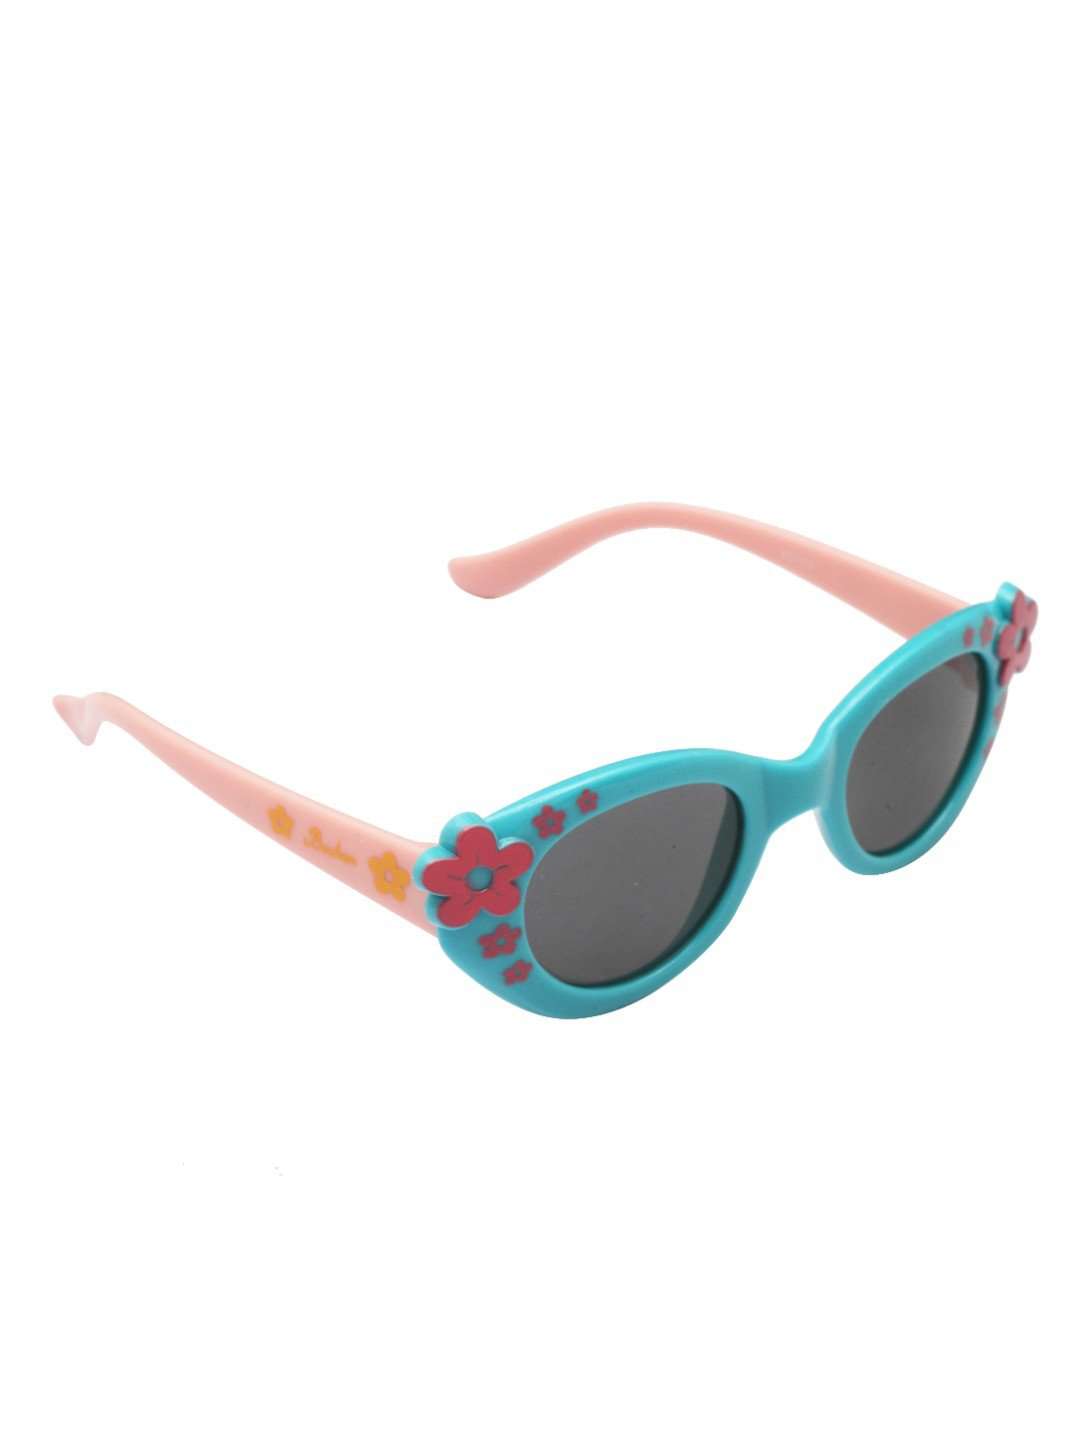 Stol'n Kids Blue and Pink Flower Cat Eye Sunglasses - SWHF